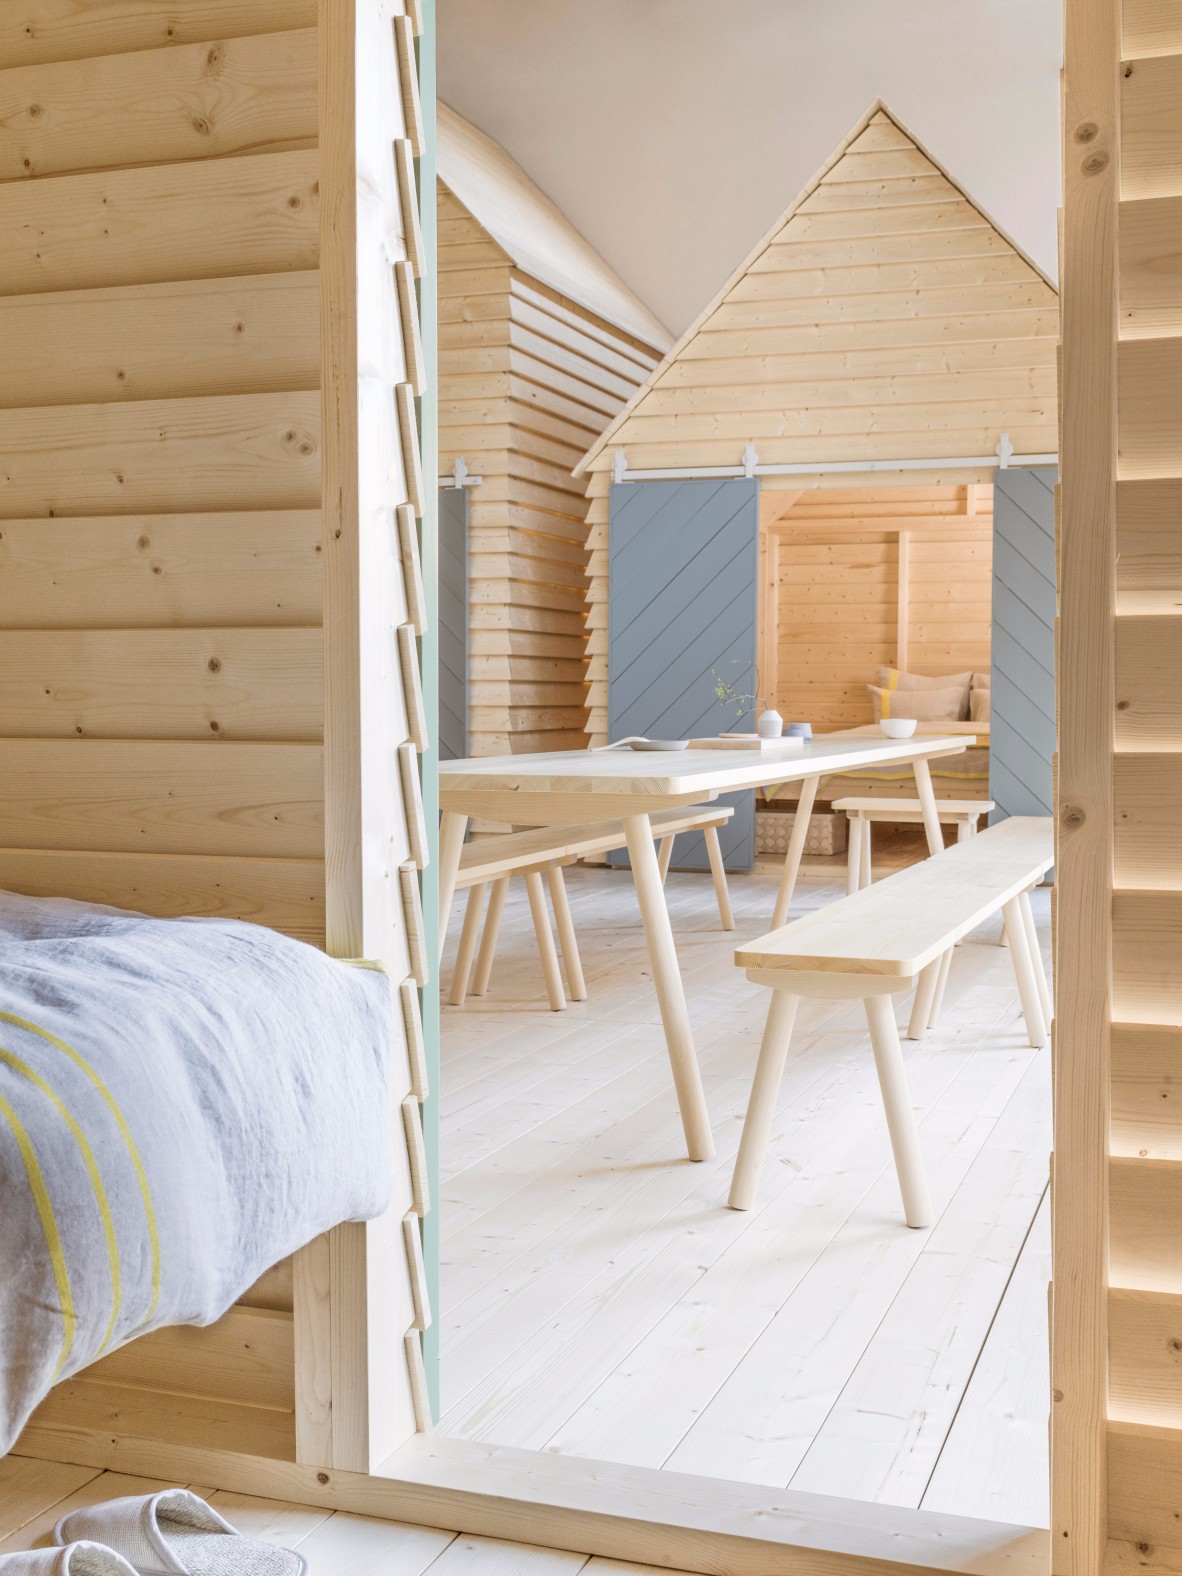 FIND OUT HOW FINNISH WOODEN CABINS CAME TO PARIS